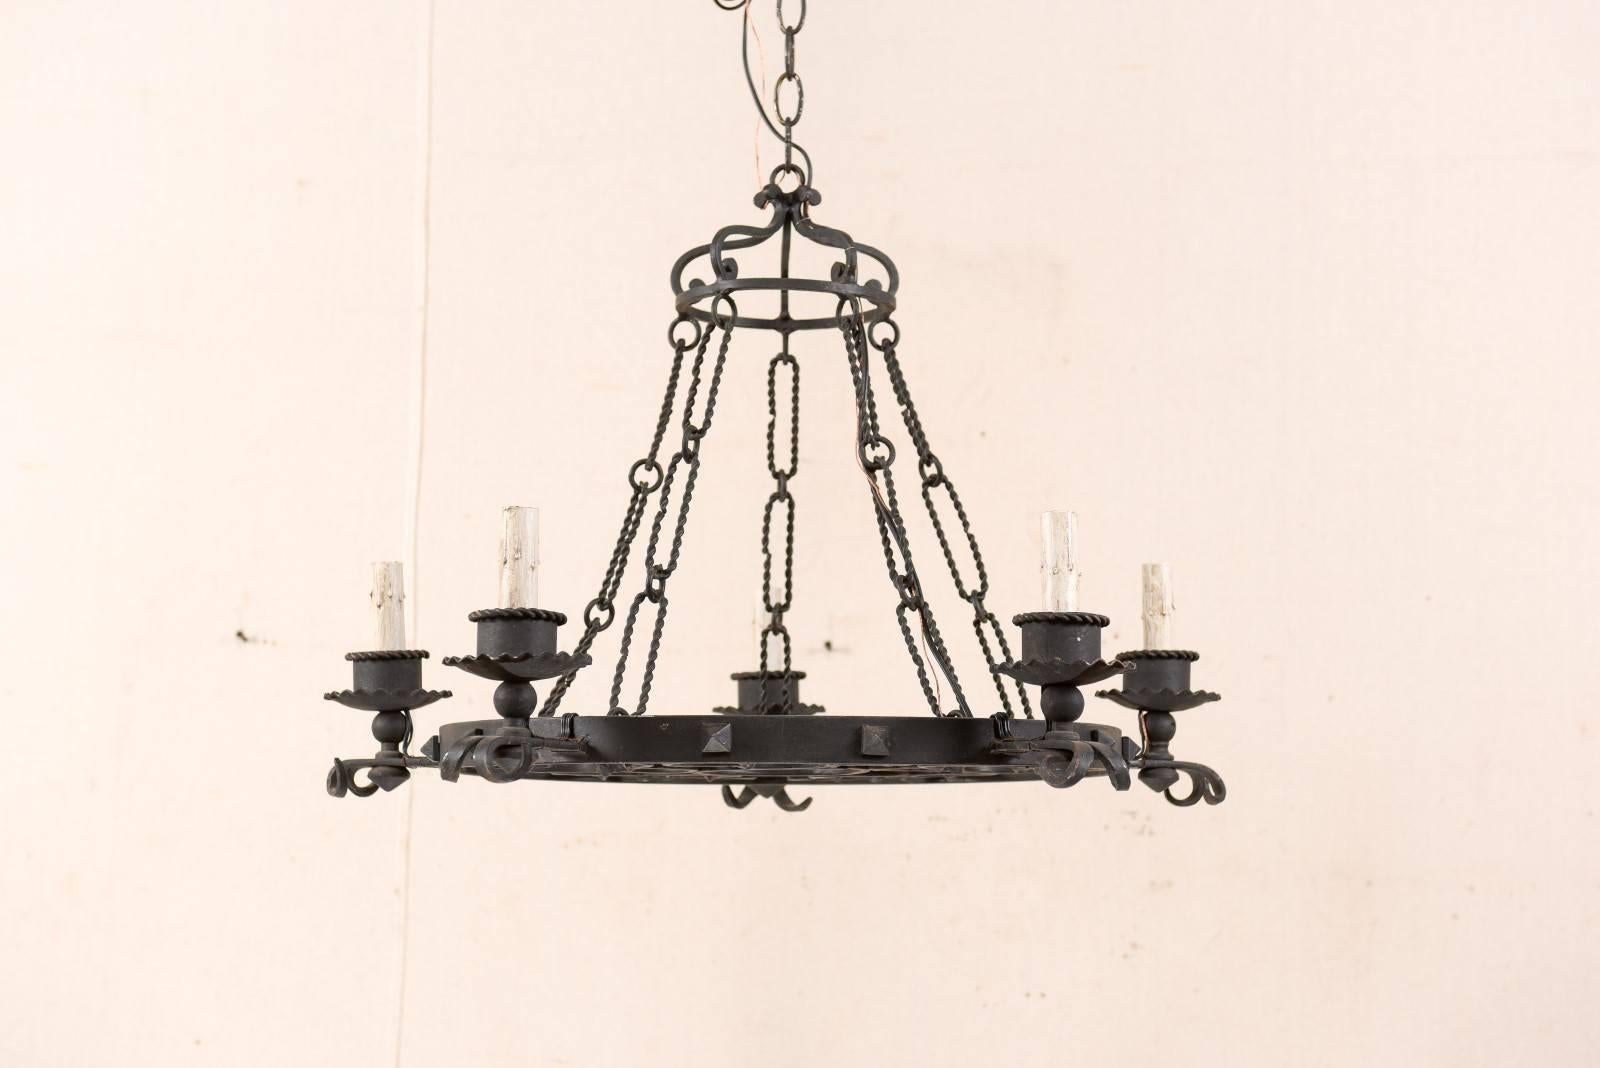 A French forged iron chandelier from the mid-20th century. This French mid-century chandelier features a circular ring with center design, facing downward, are segmented areas divided from the five light arms, each with a four leaf clovers. Five